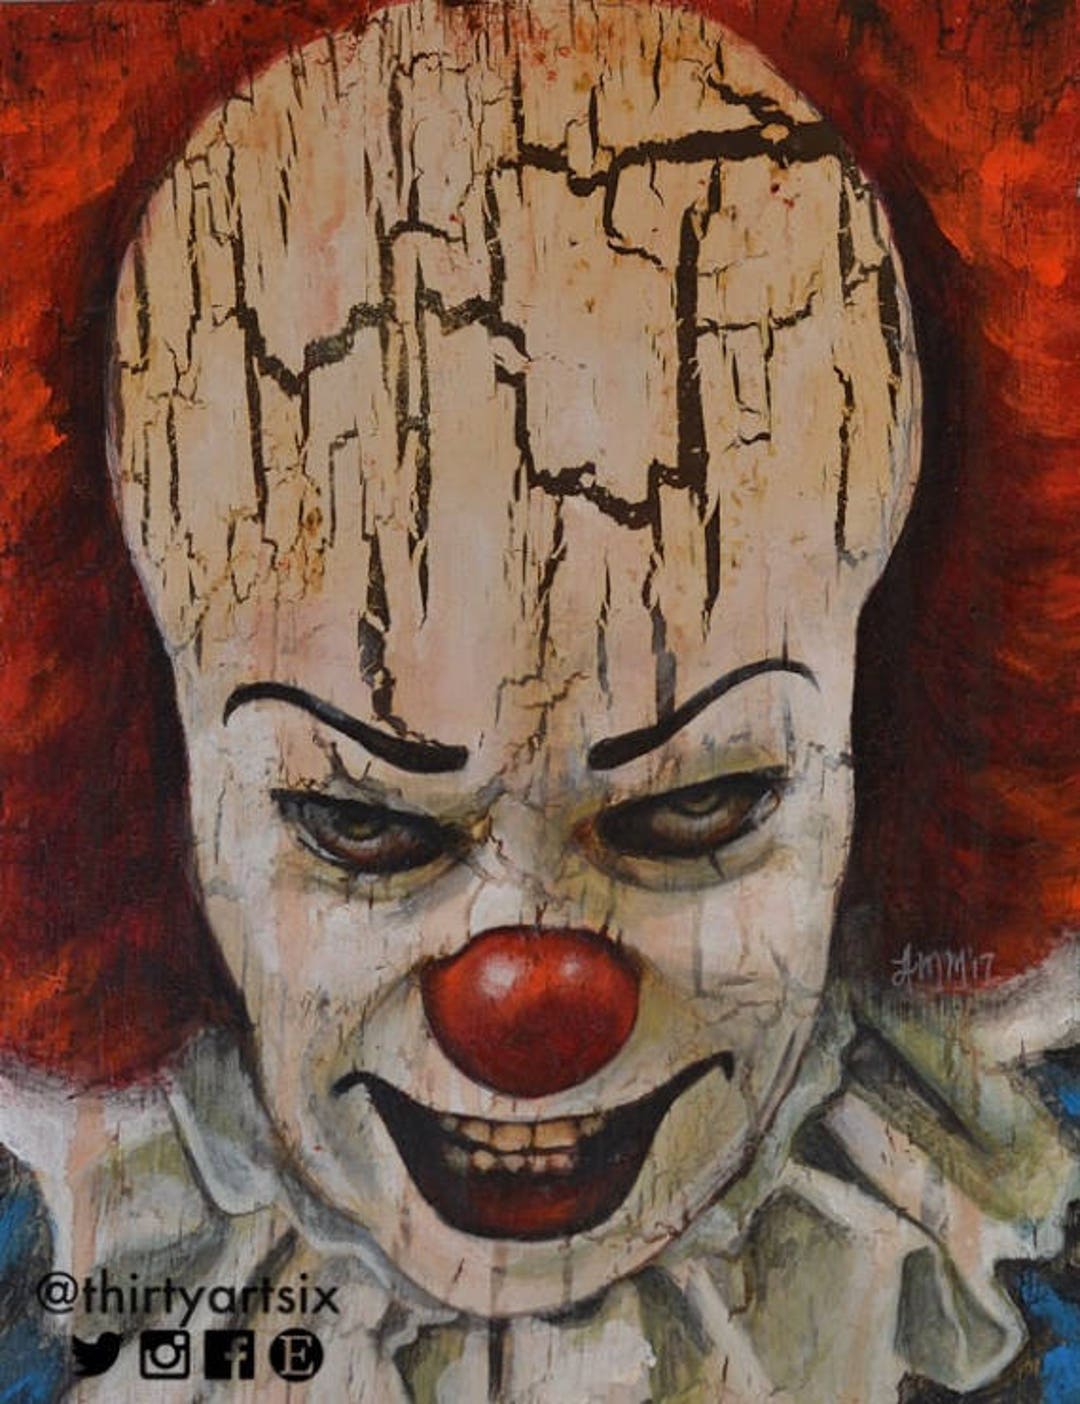 Stephen Pennywise Print Tim King - Painting Art 11x14 Etsy Curry IT Clown